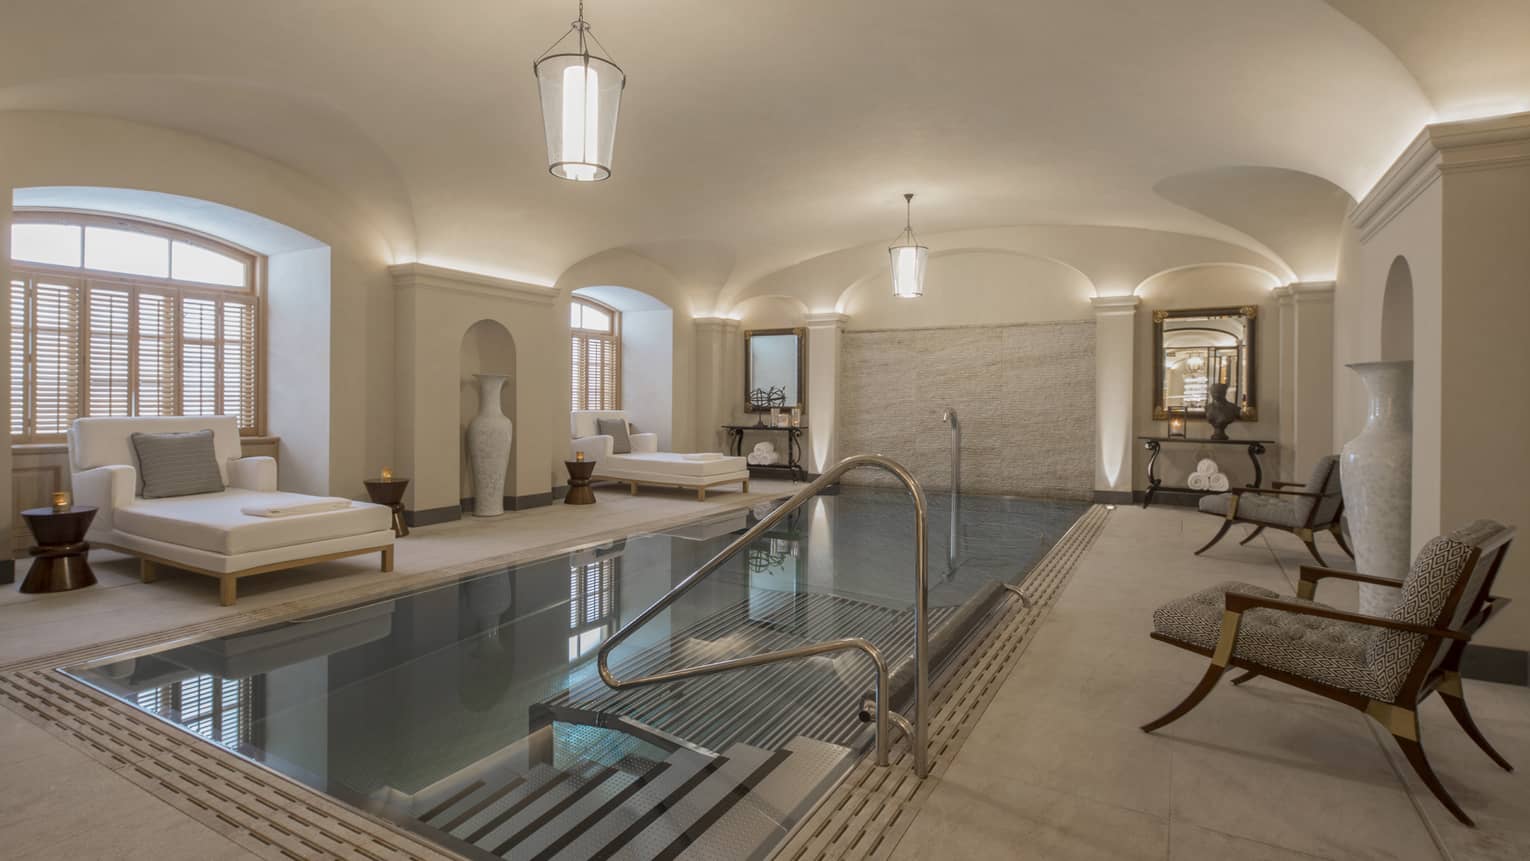 AVA Spa vitality pool  flanked by white lounge chairs under domed ceiling